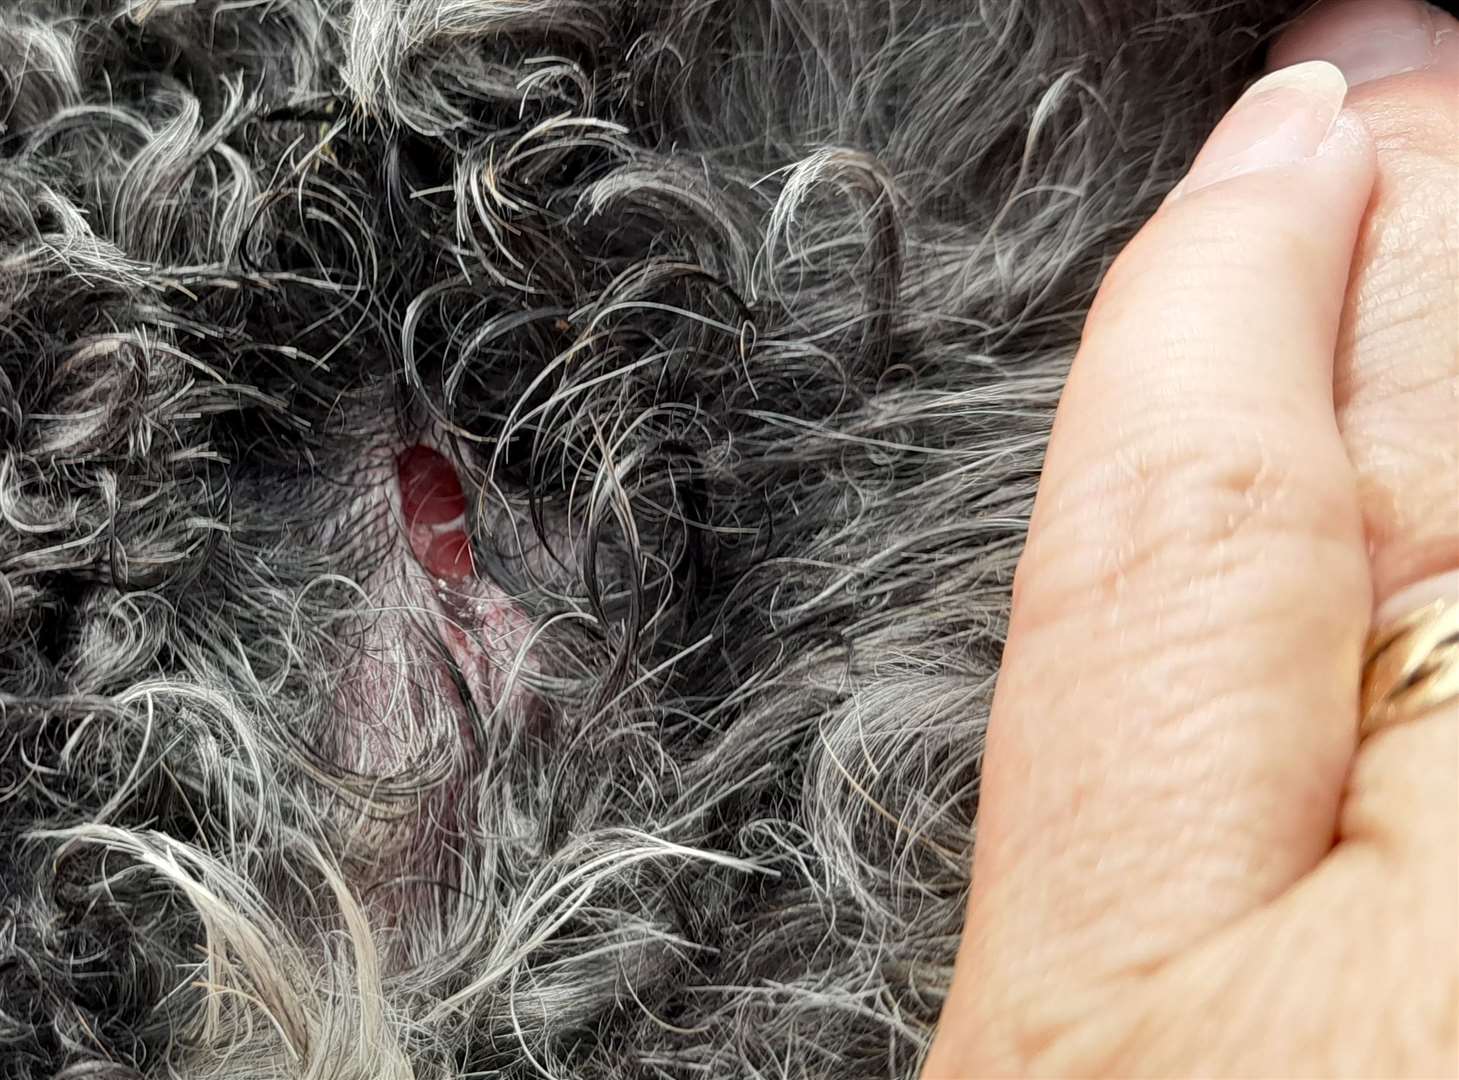 An 'bite mark' on the cockapoo whose owner says was viciously attacked by two of the Labradors. Picture: DGS